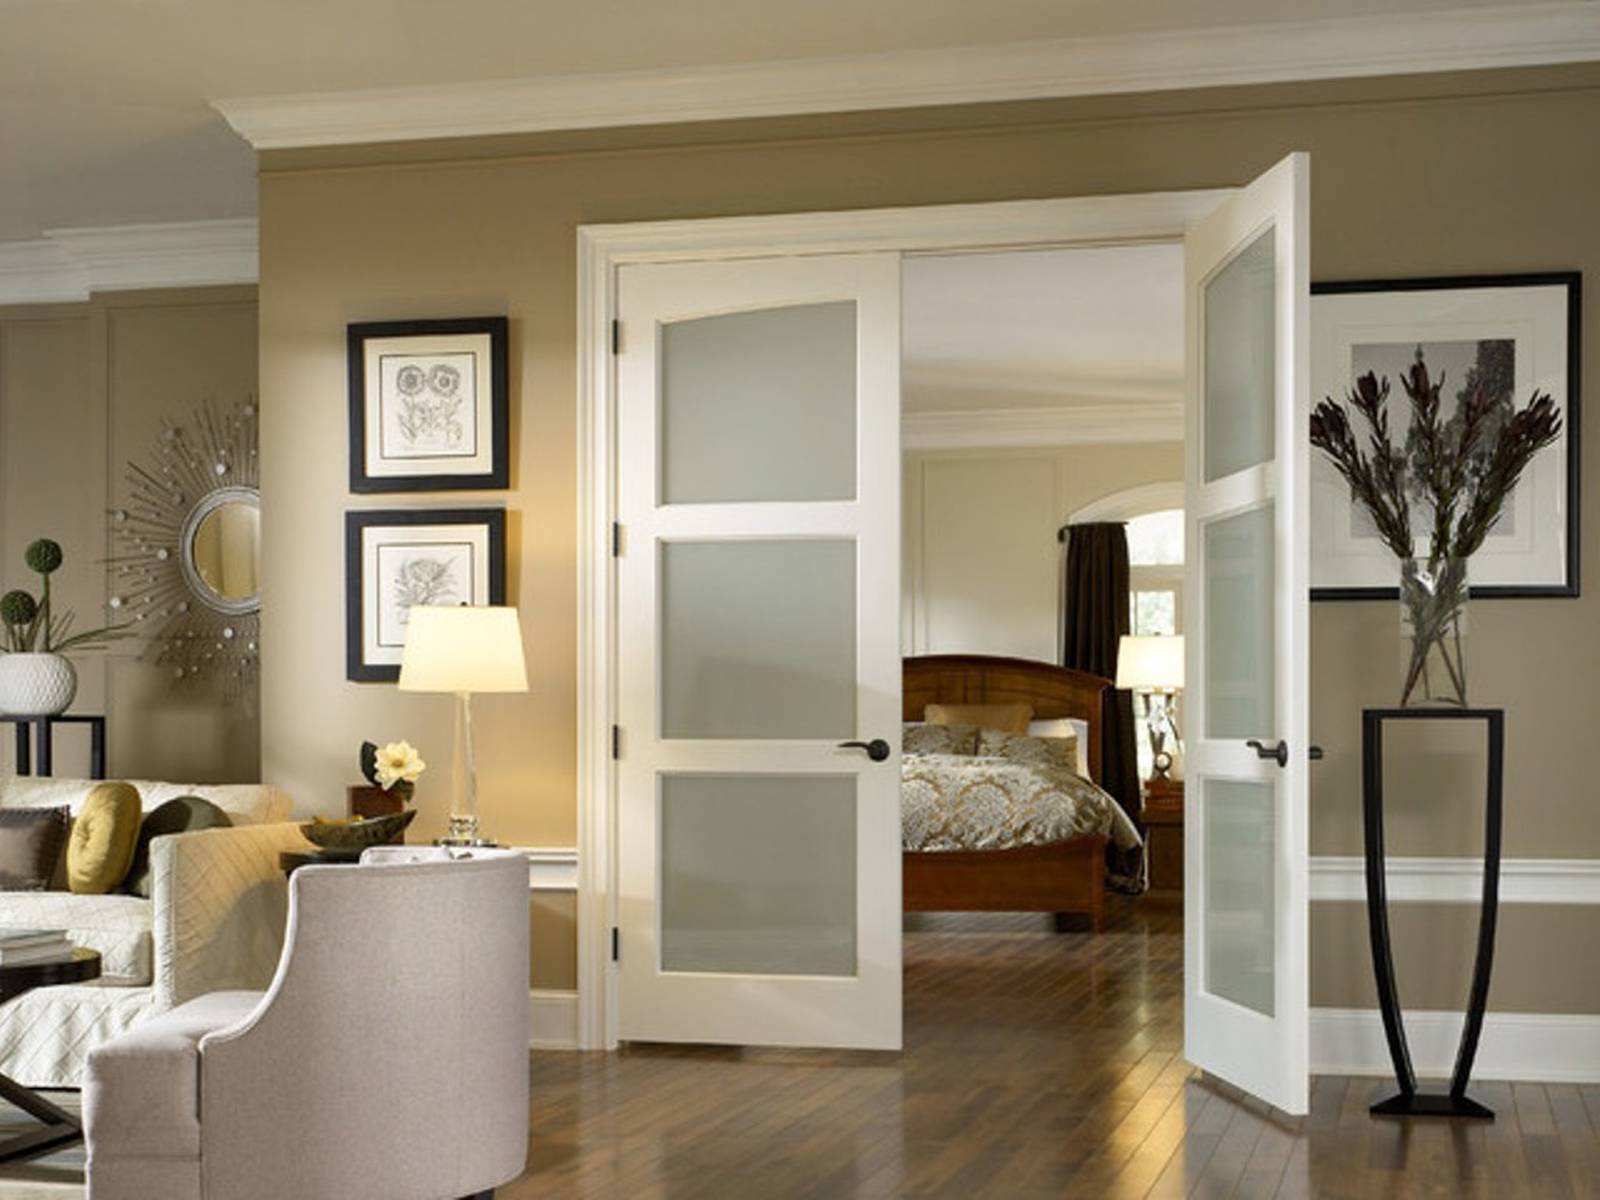 From Function To Fashion: Making A Statement With Interior Doors